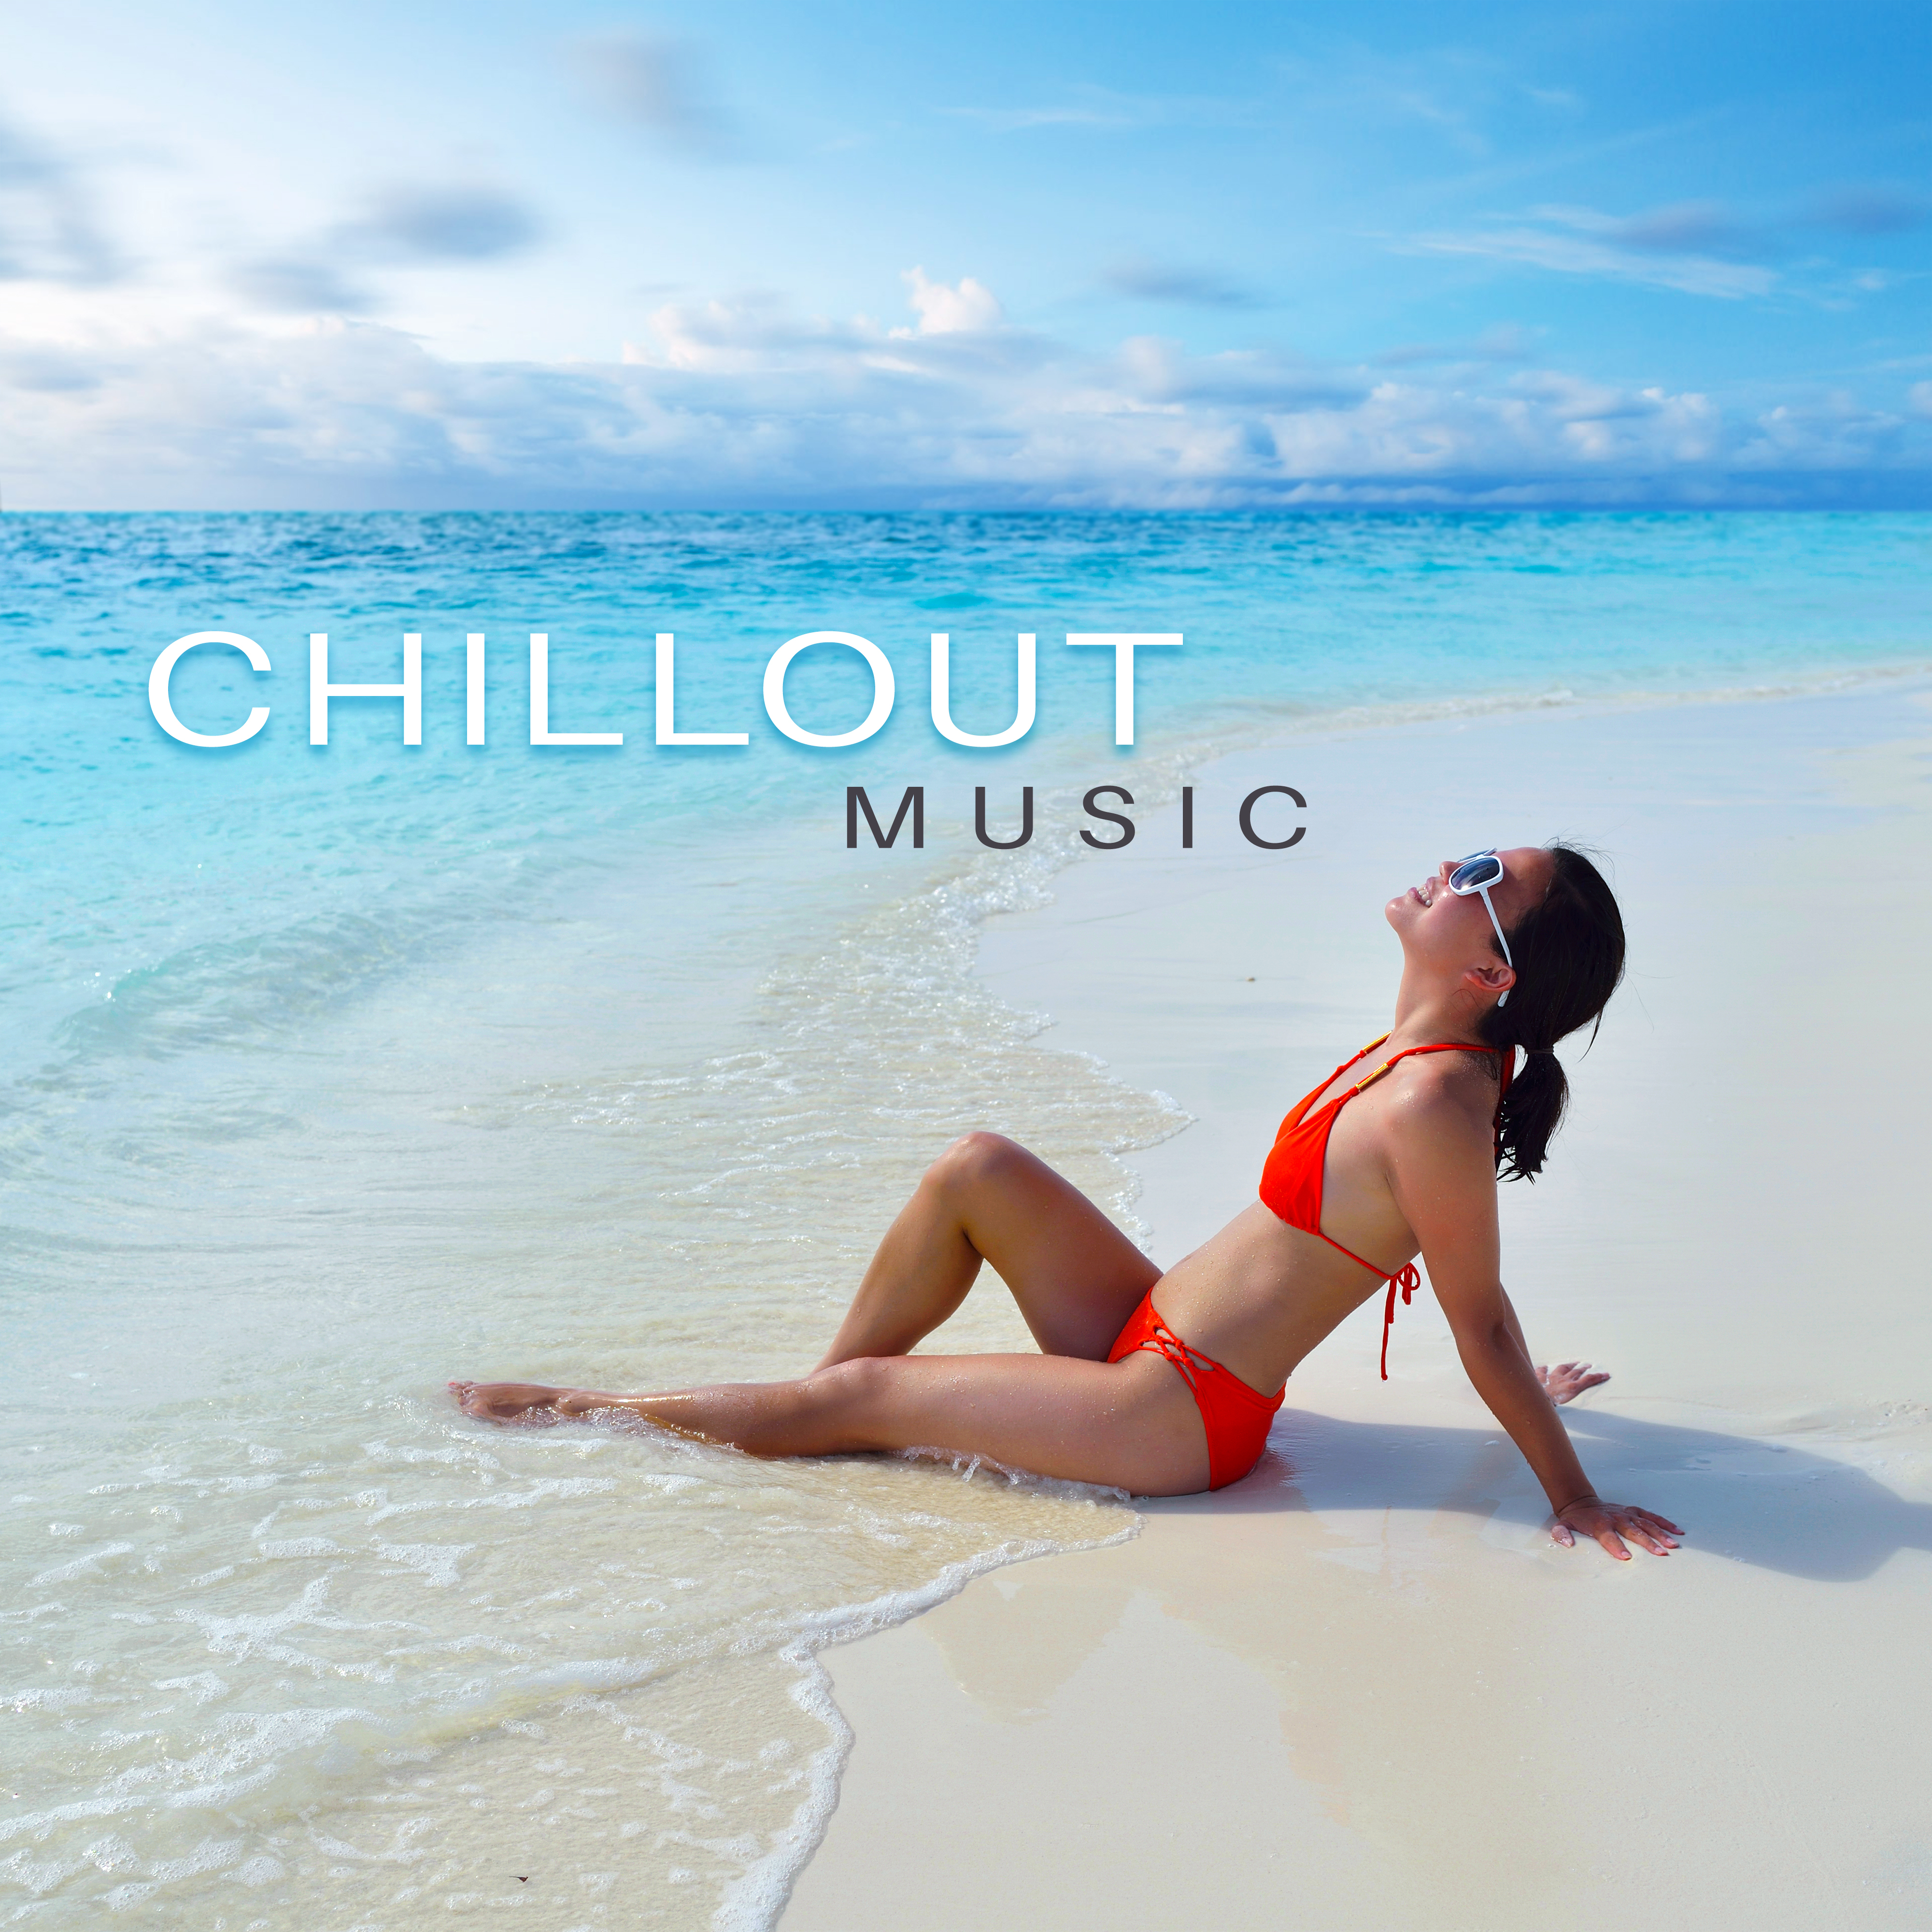 Chillout Music – Chill Out 2017, Summer Music, Relax & Chill, Lounge, Chillout After Work